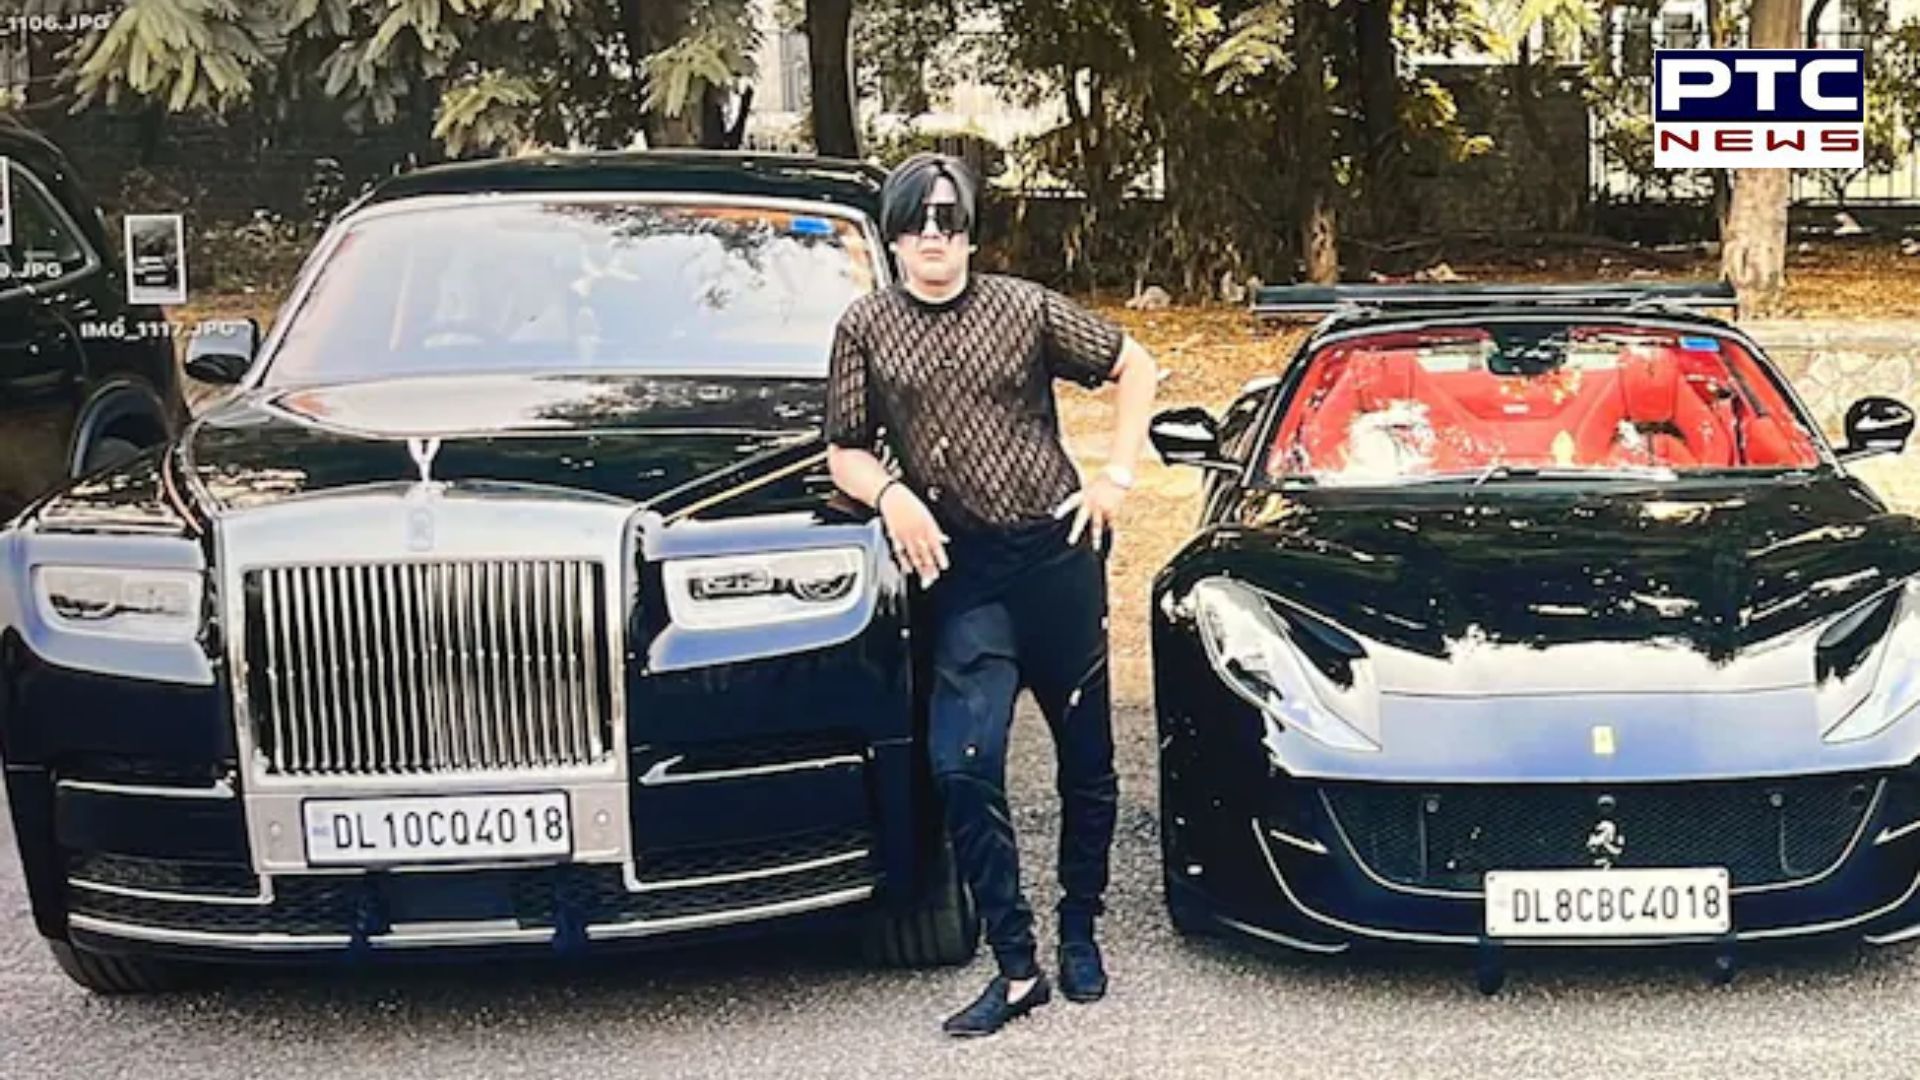 Rolls Royce, Lamborghini, stacks of cash seized from tobacco baron's residence